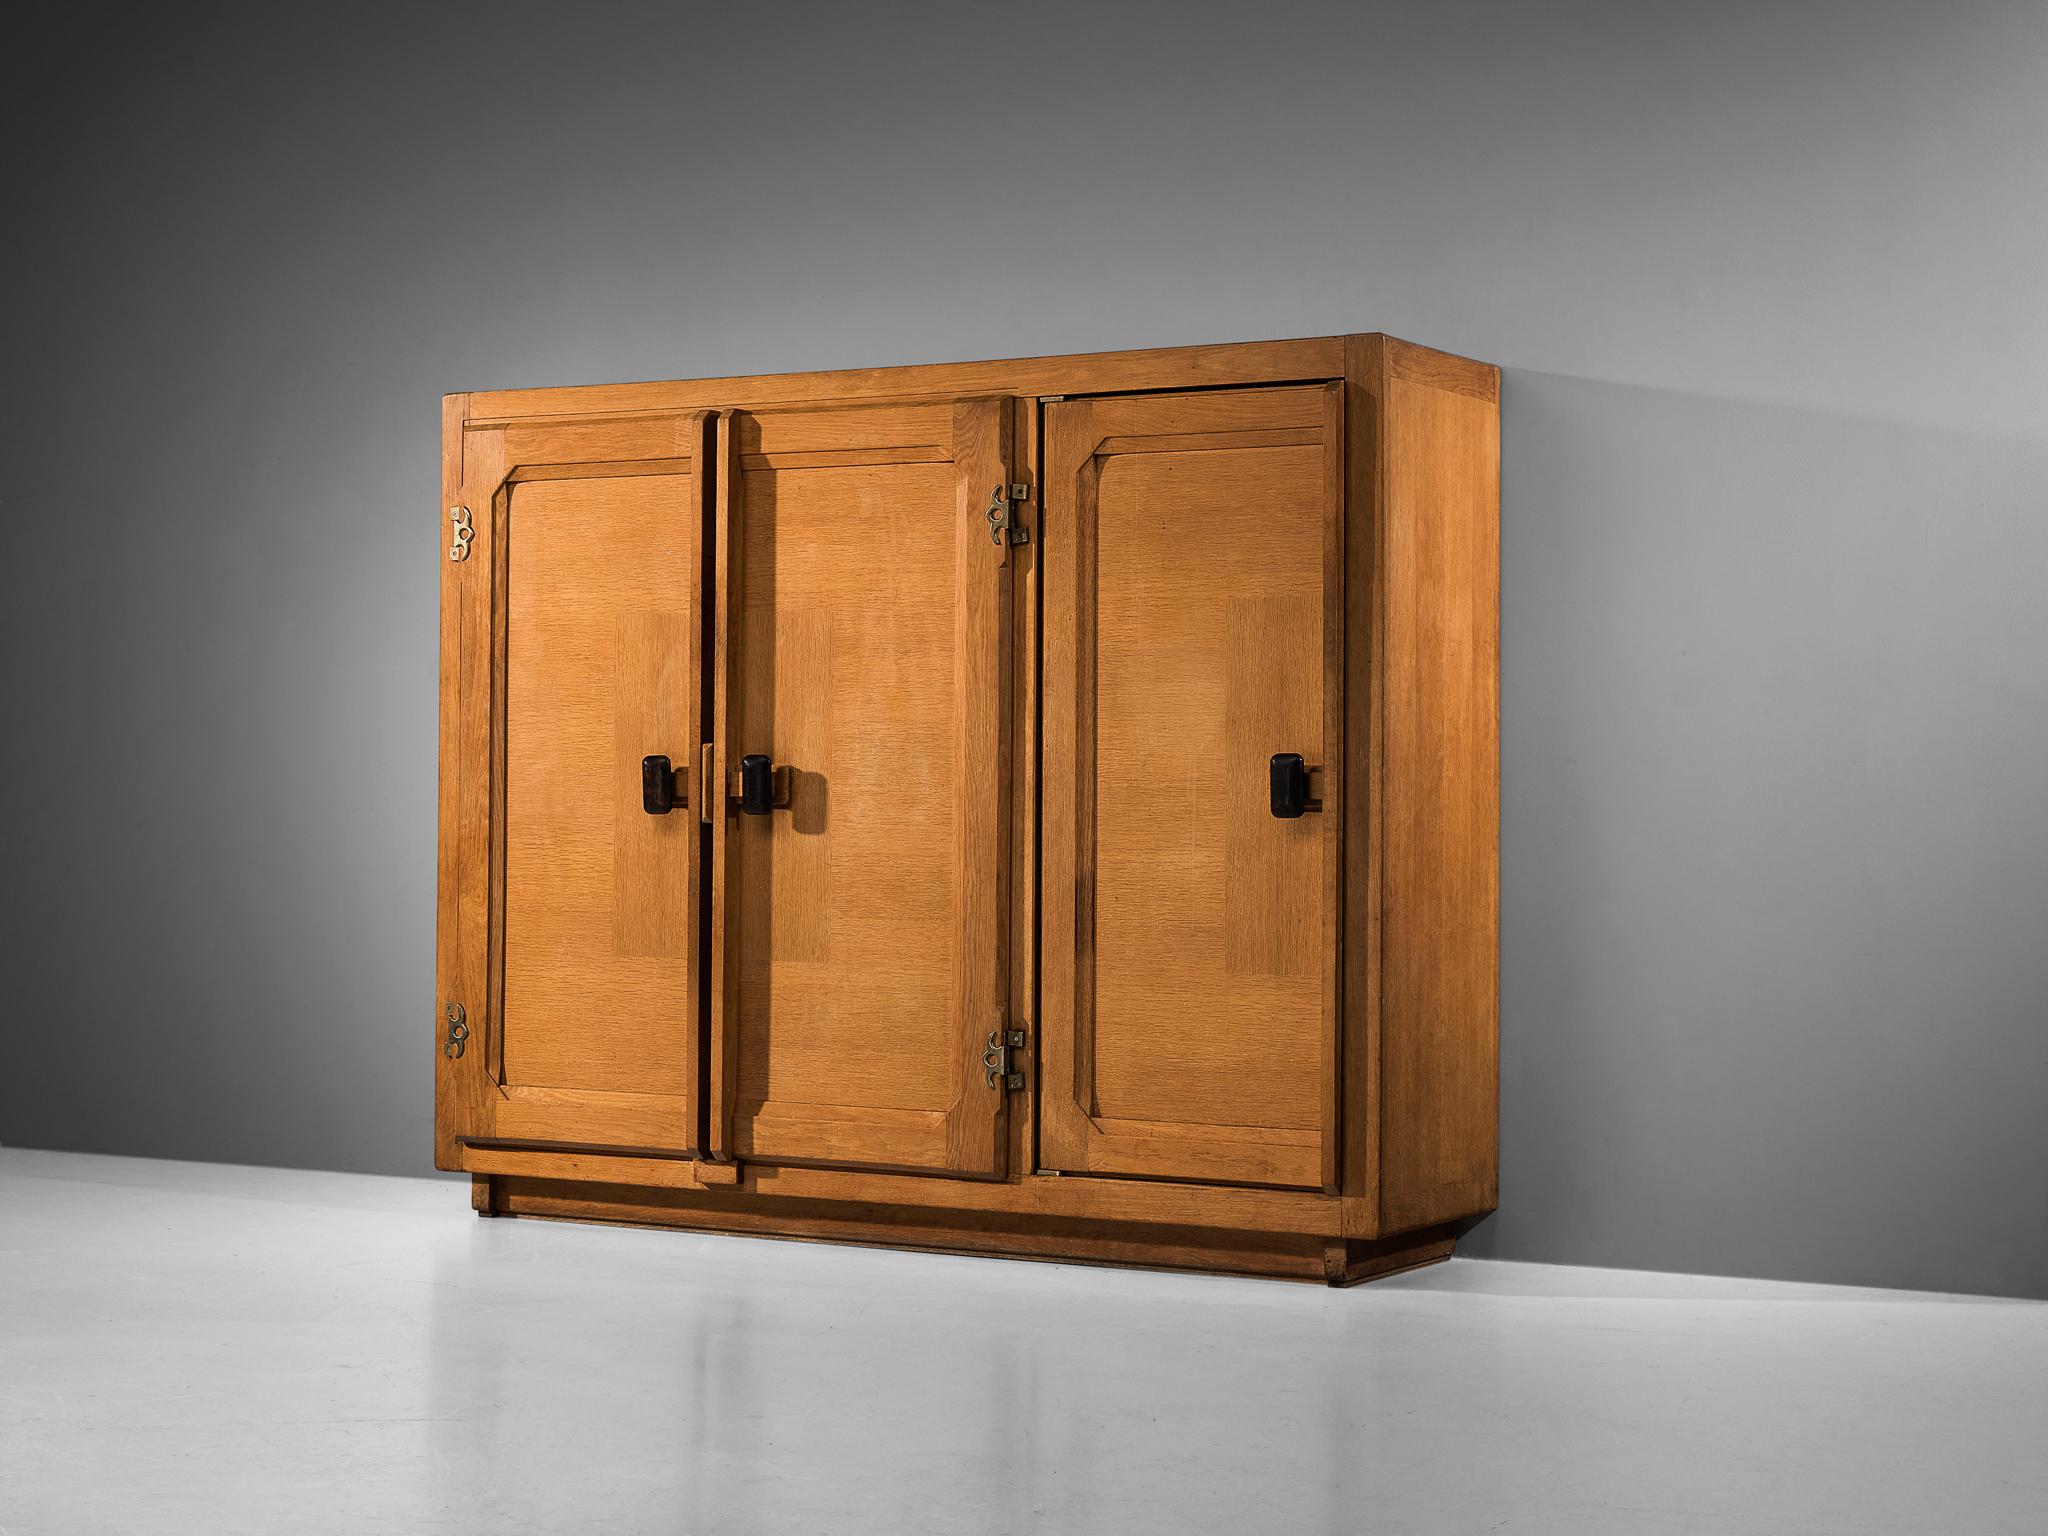 Guillerme et Chambron for Votre Maison, armoire, oak, brass, France, 1960s

This grandiose wardrobe is a good example of excellent woodworking by virtue of the inlay veneer and the graphic designed door panels, creating a rhythmic pattern on the